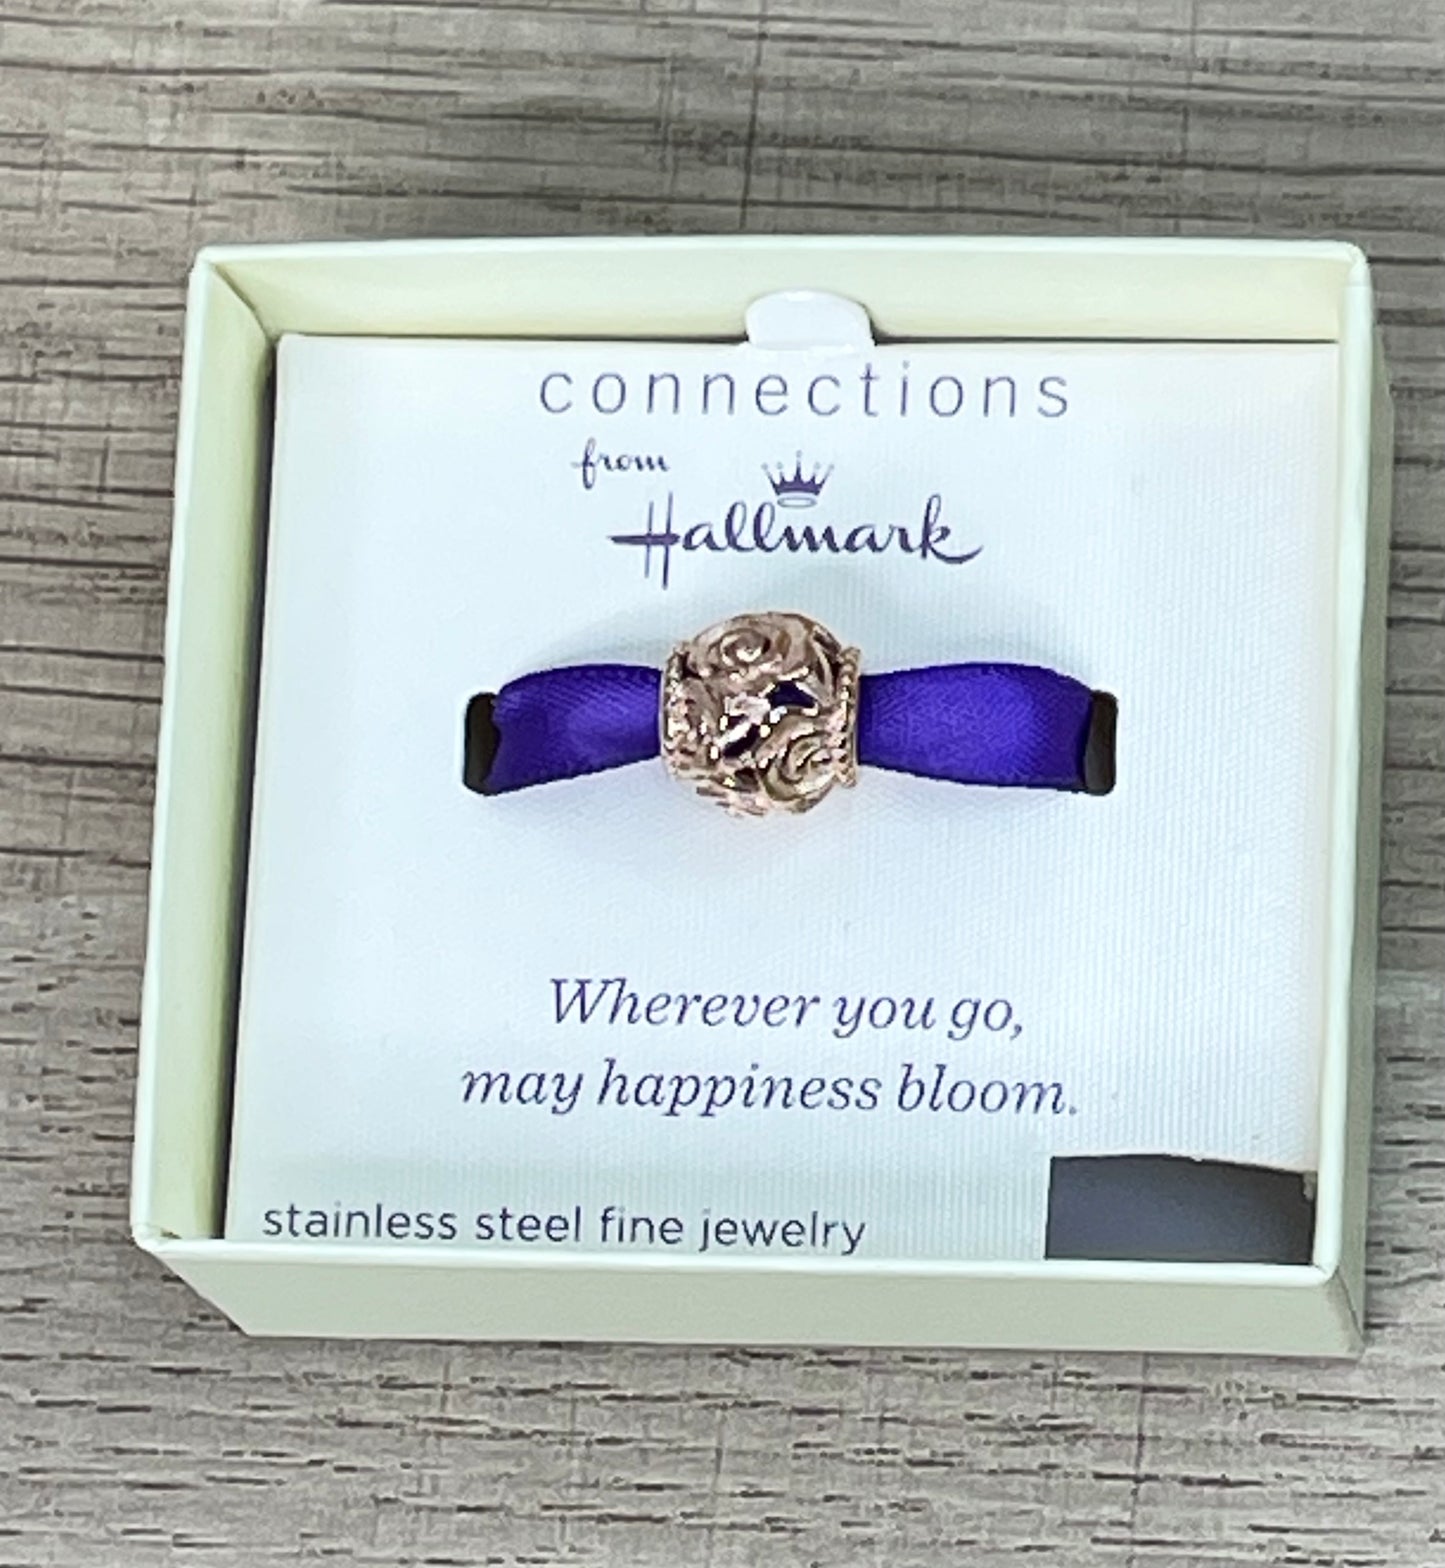 Hallmark Connections Stainless Steel Rose Gold Plated Bead